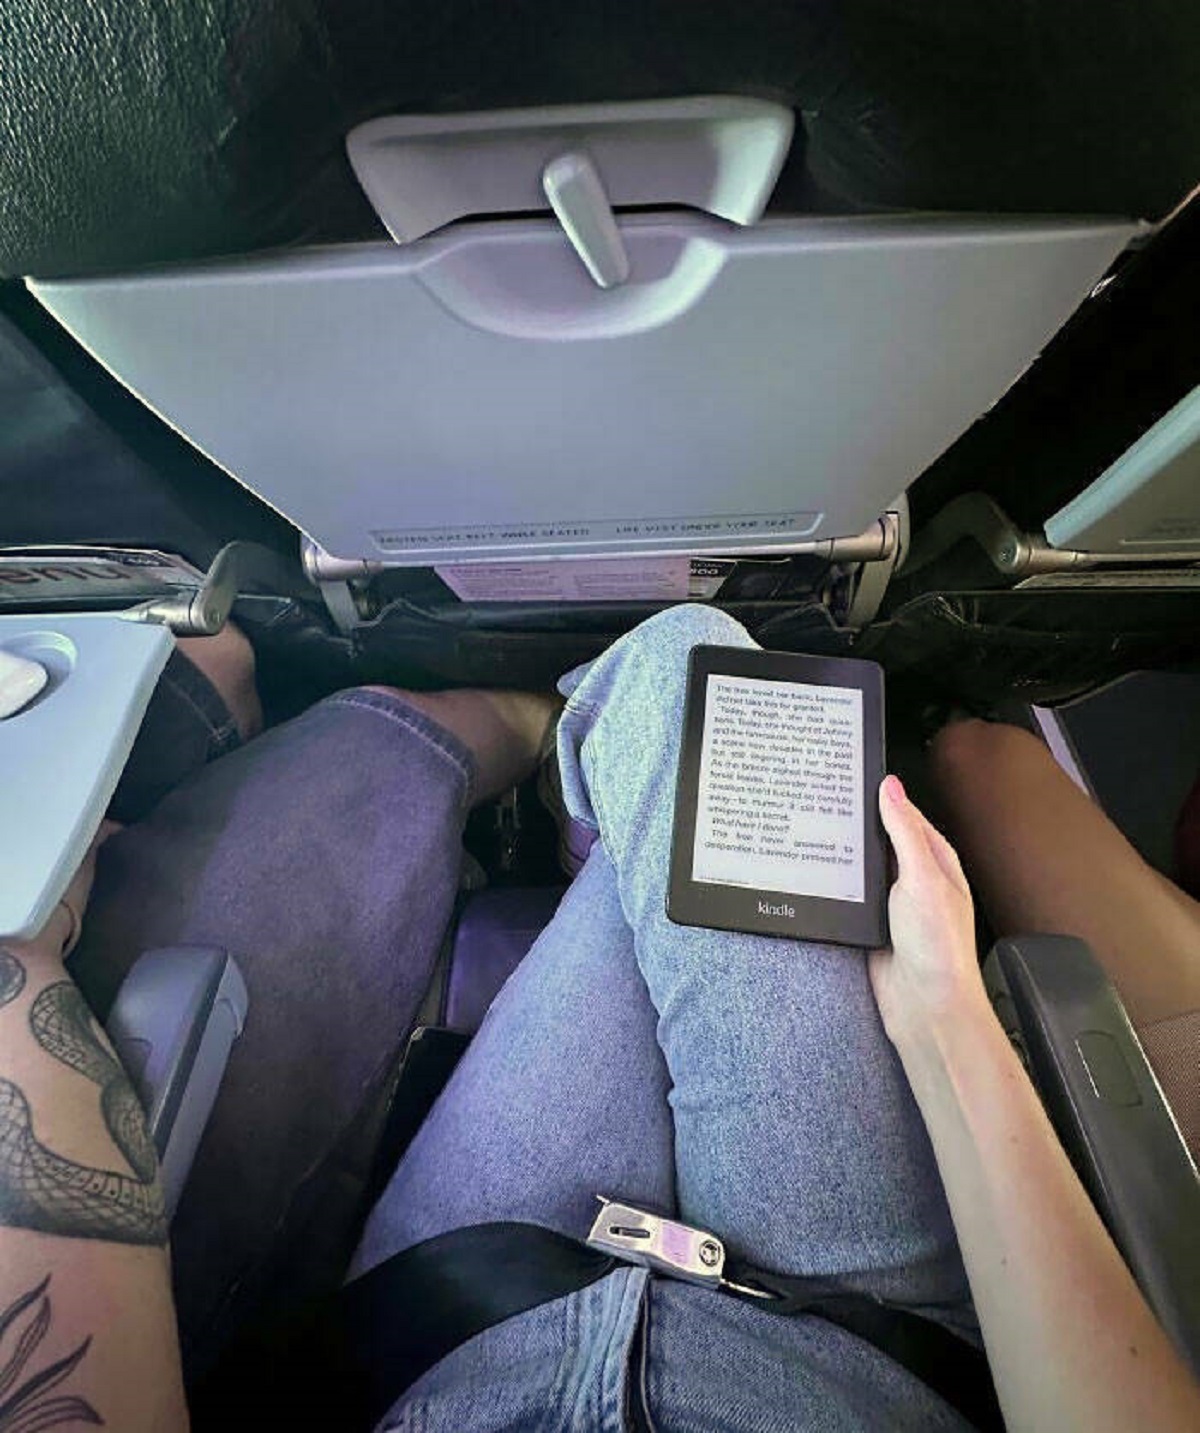 "The Woman Next To Me Stretched Out Her Leg Into My Leg Space On The Plane"